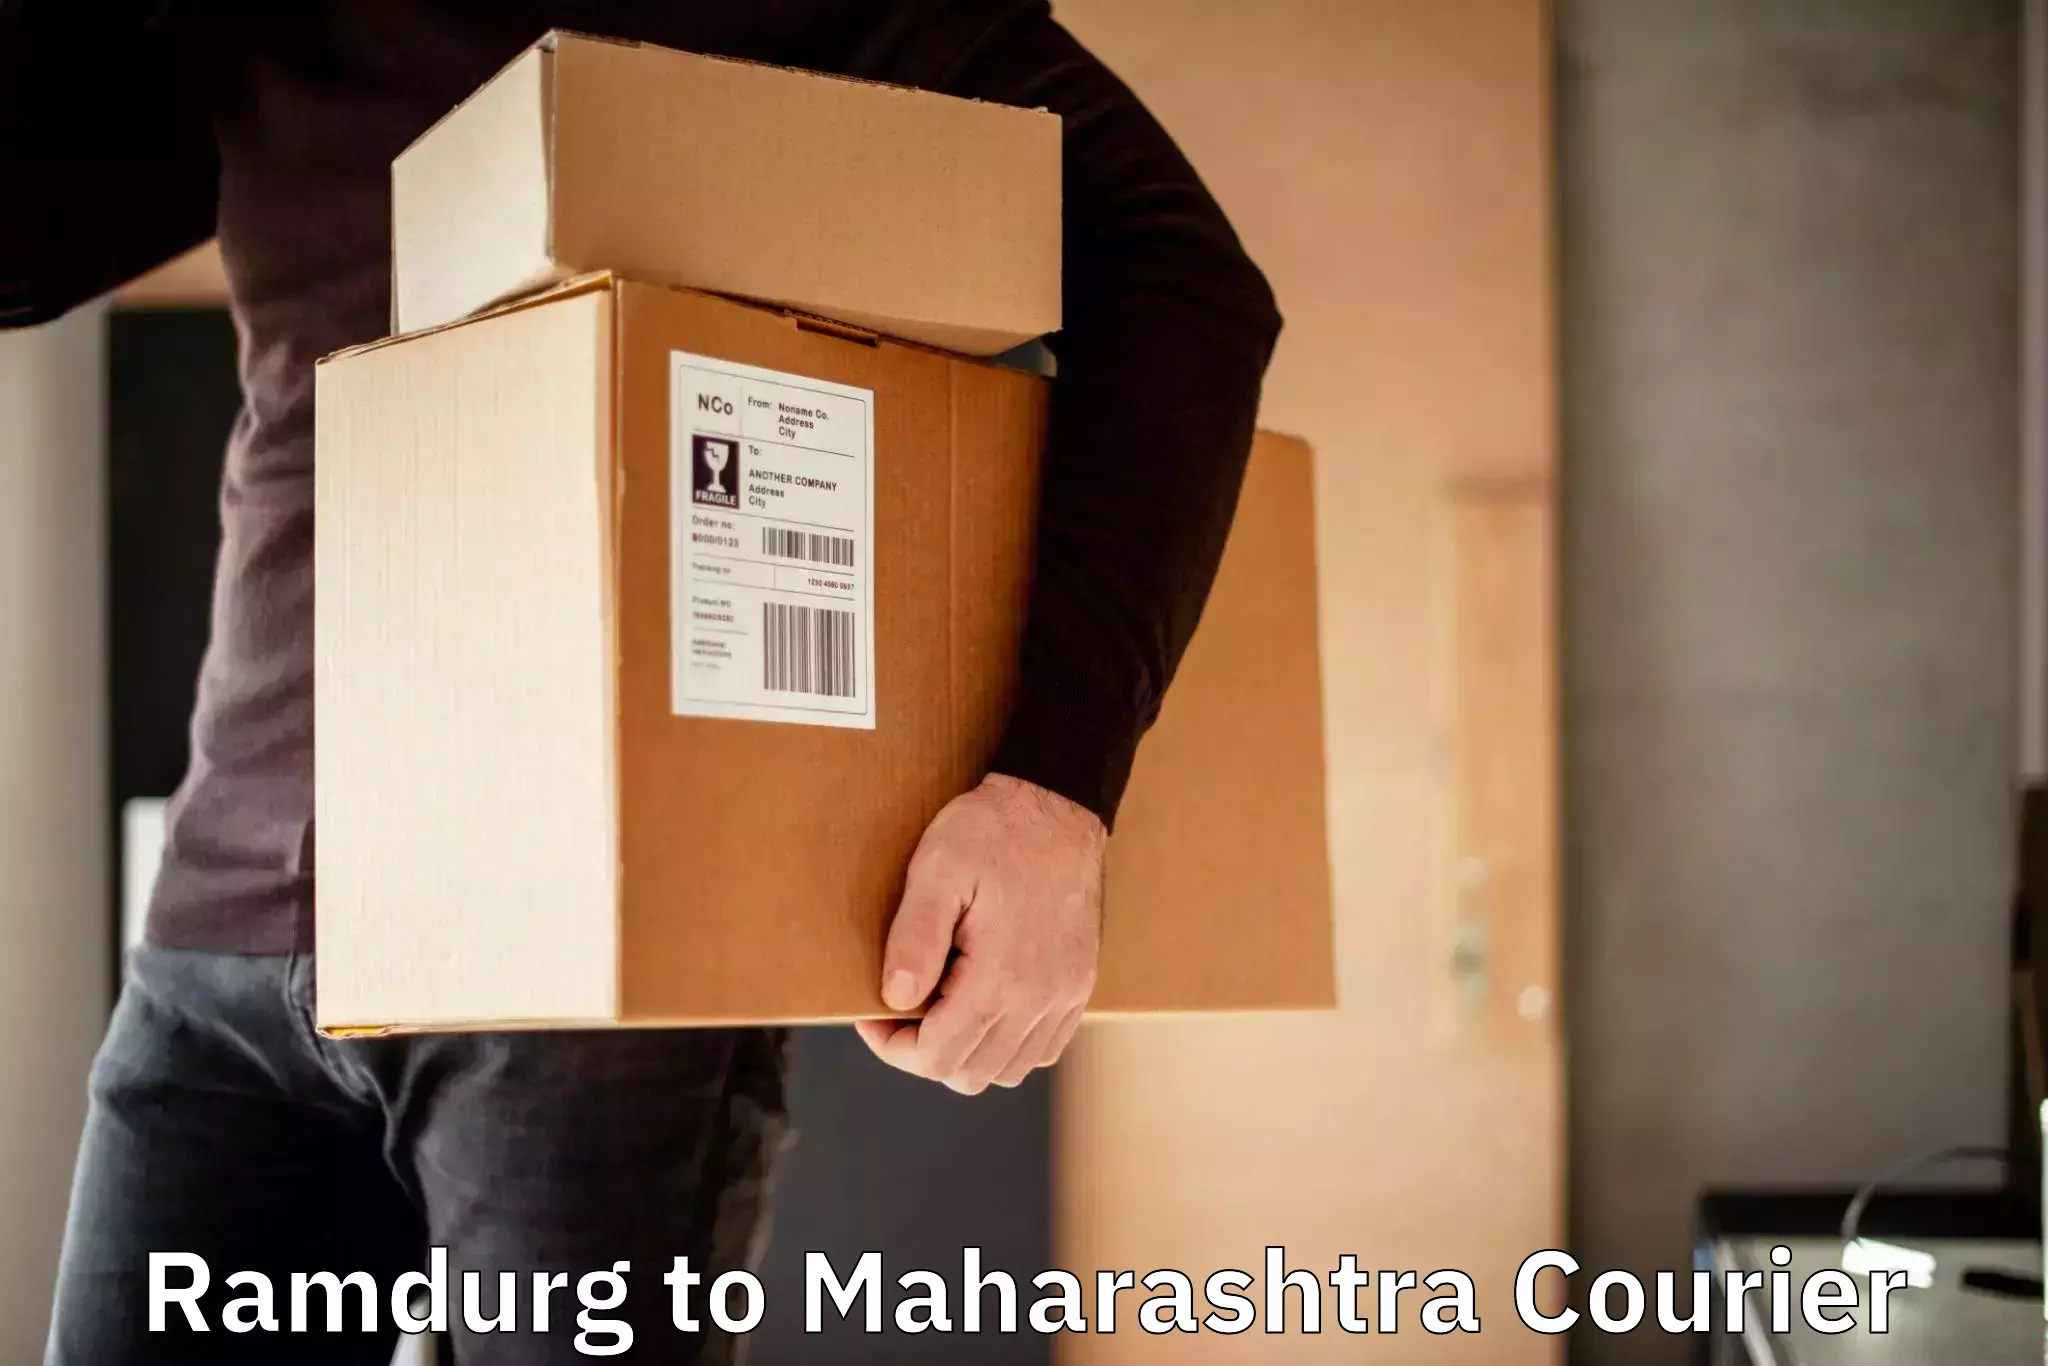 Courier service innovation in Ramdurg to Solapur